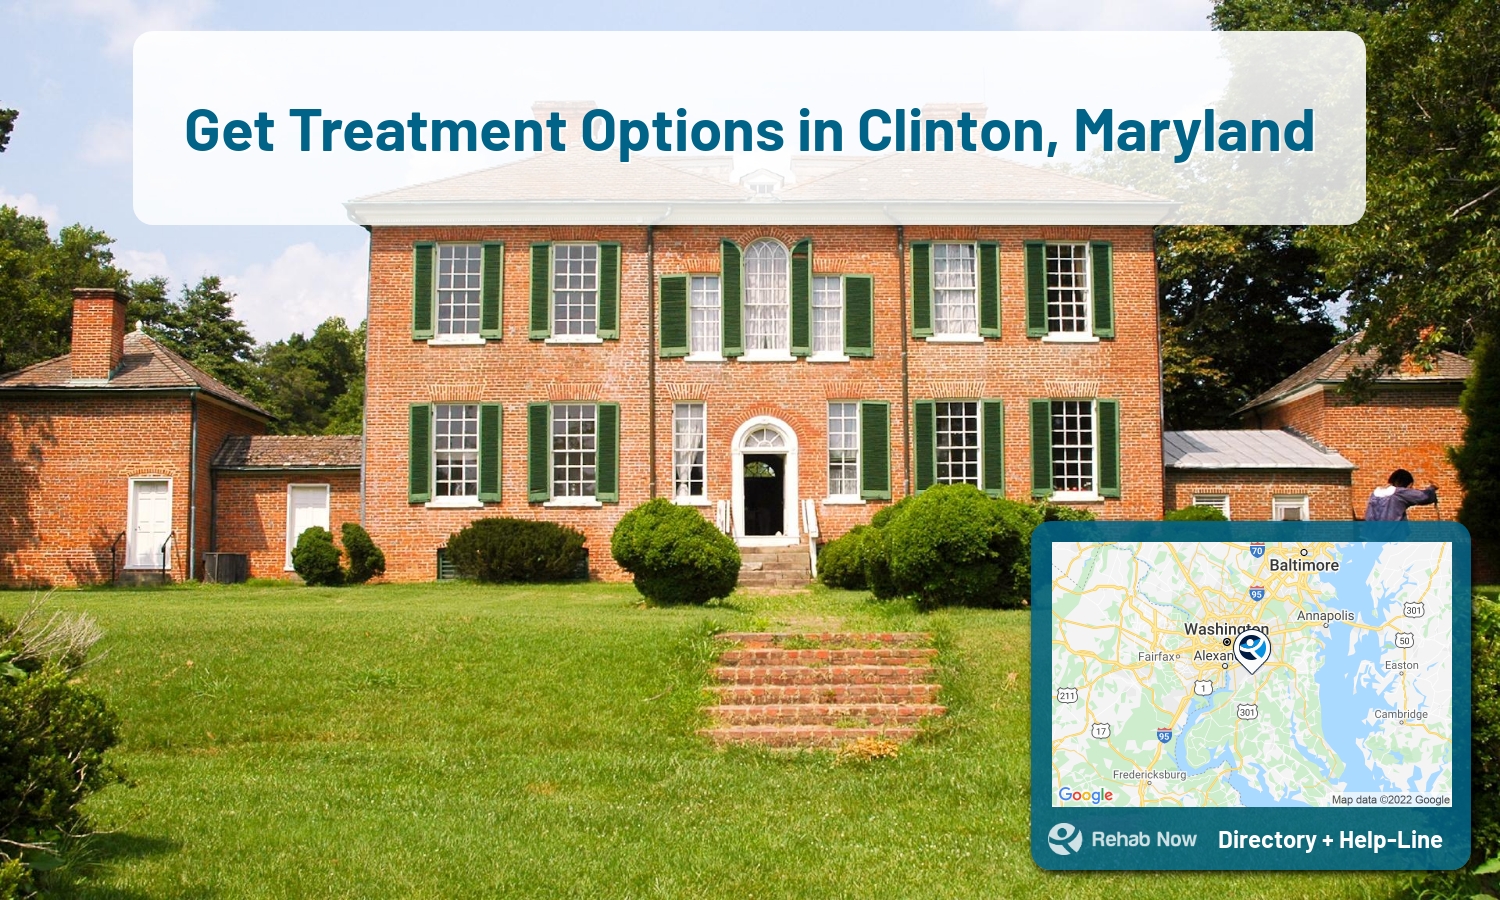 Our experts can help you find treatment now in Clinton, Maryland. We list drug rehab and alcohol centers in Maryland.